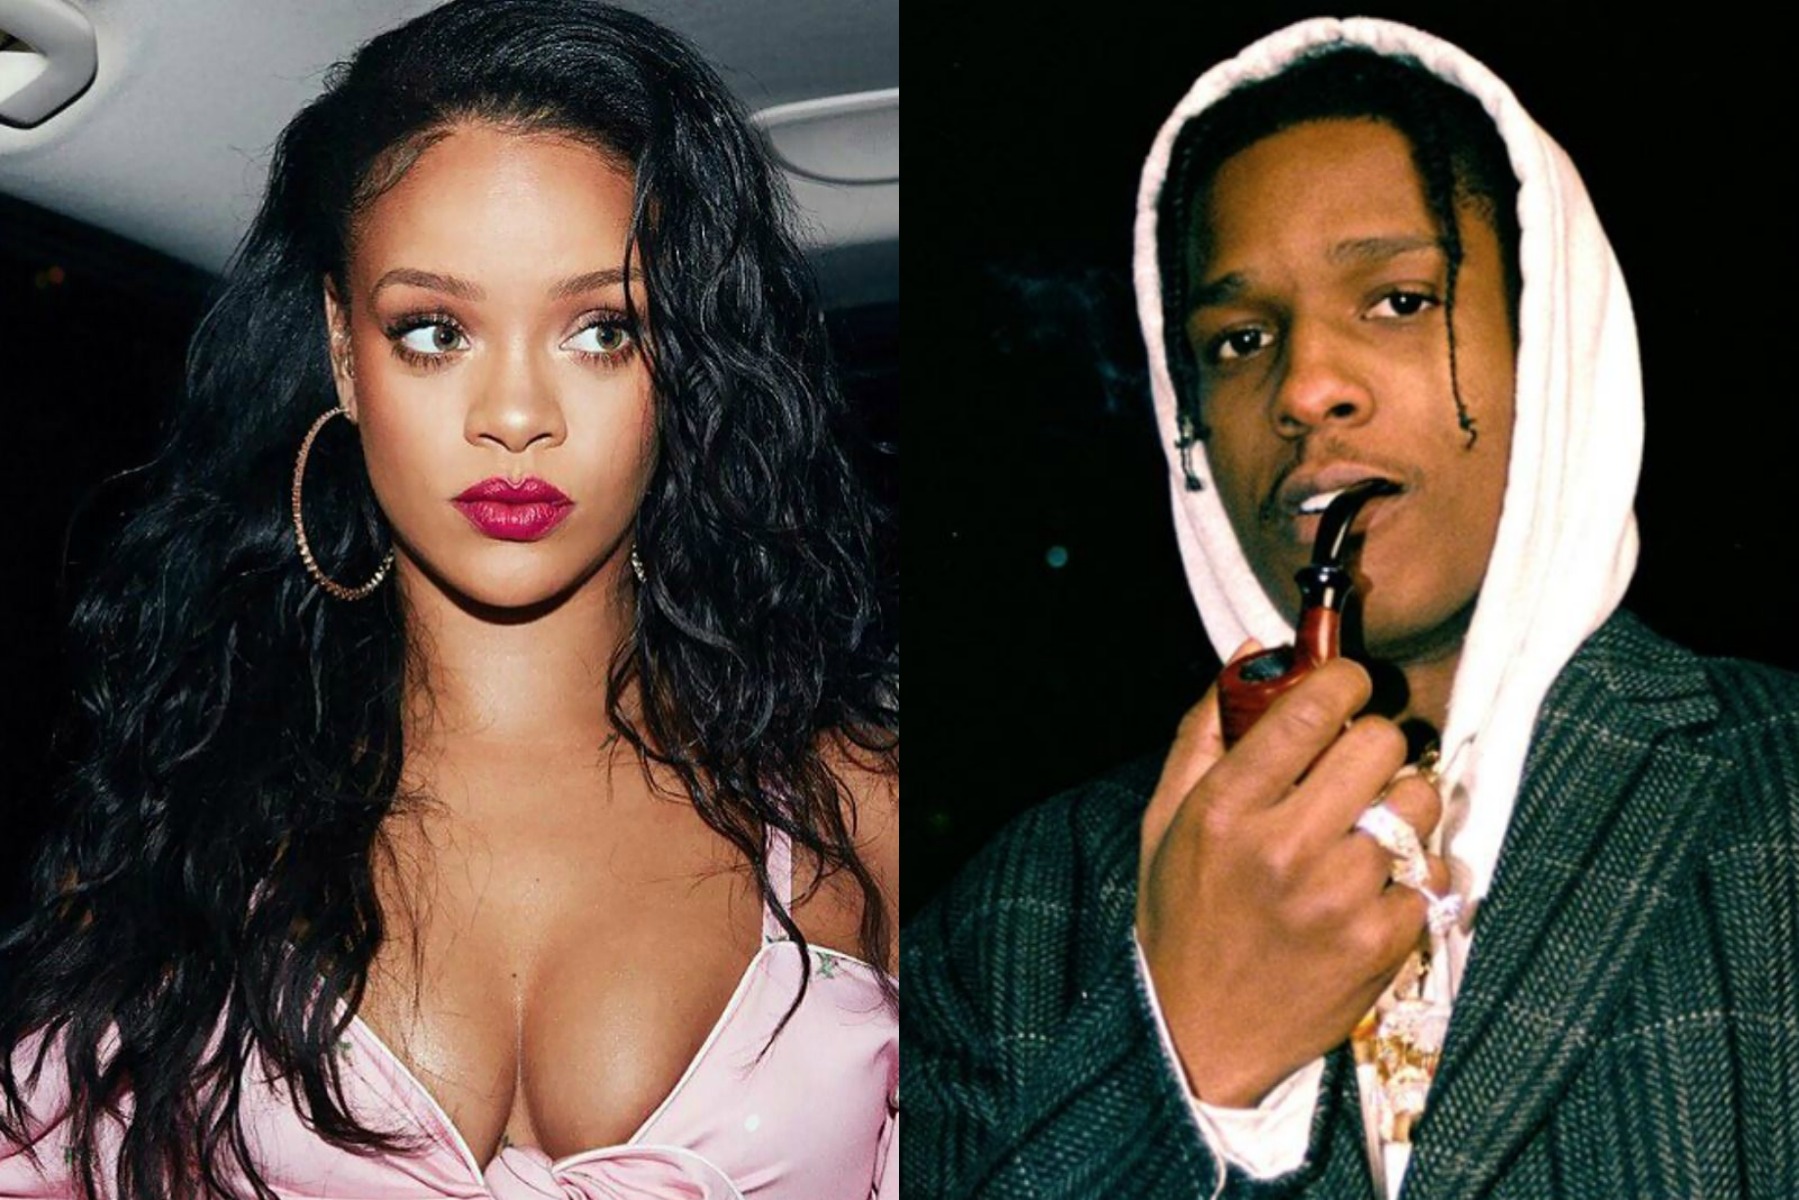 Rihanna & ASAP Rocky Hold Hands In Black Outfits: NYC Photos